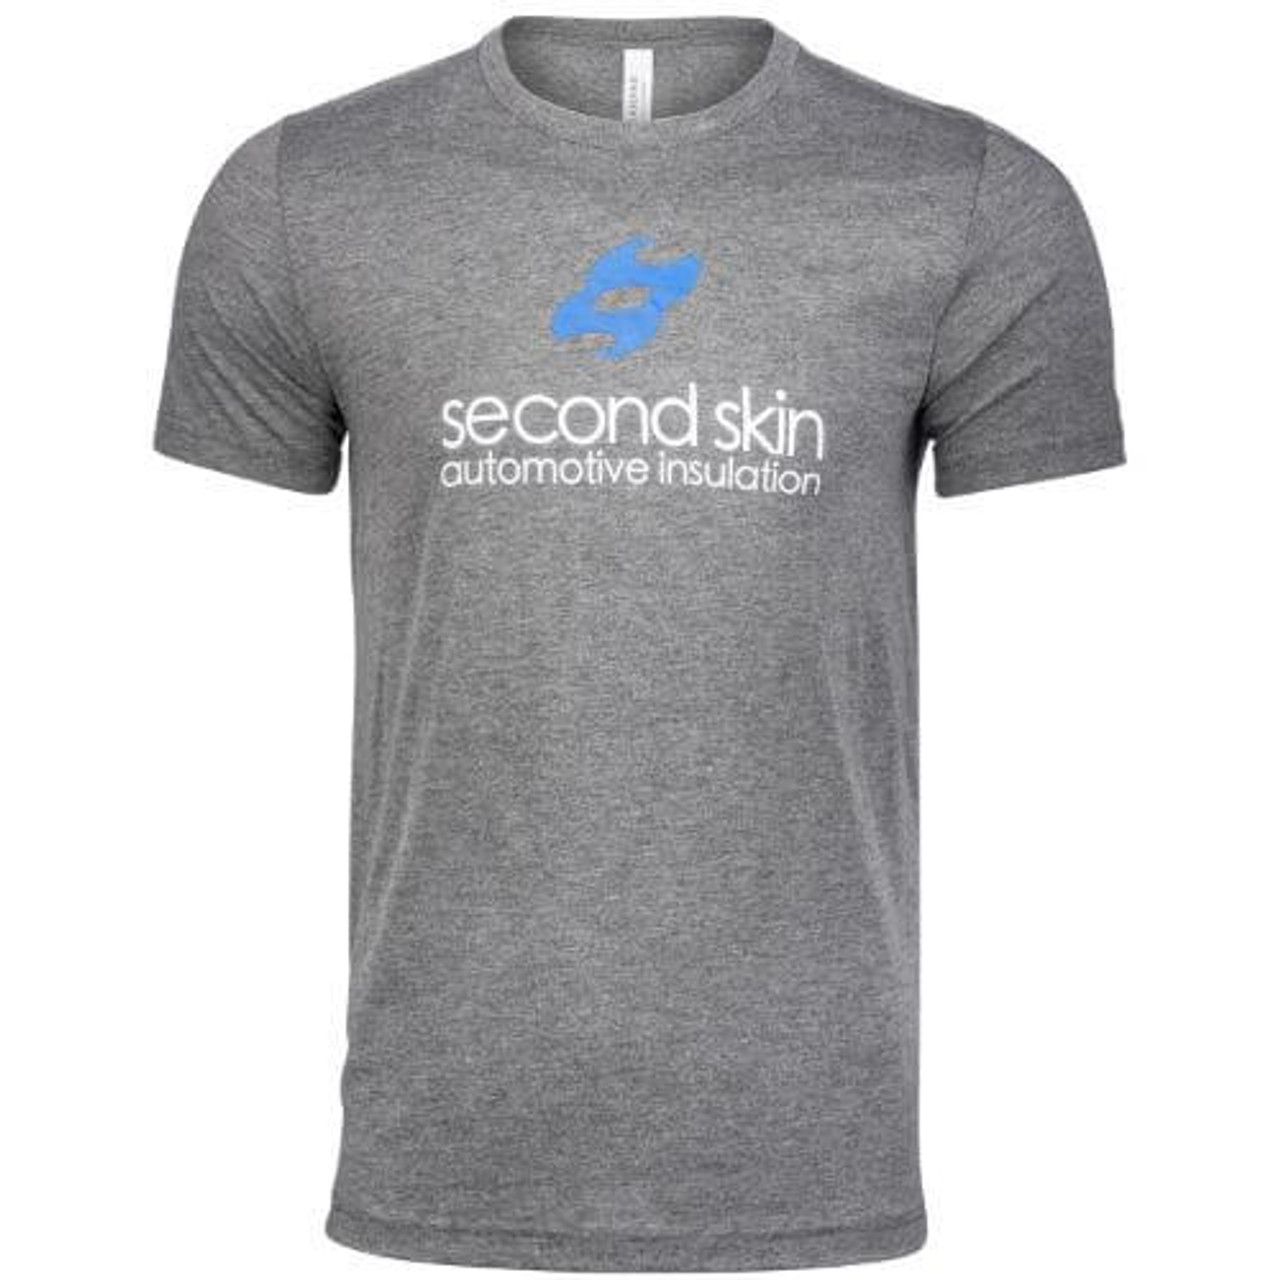 Tshirts: Soft, Comfortable, & Awesome - Second Skin Audio